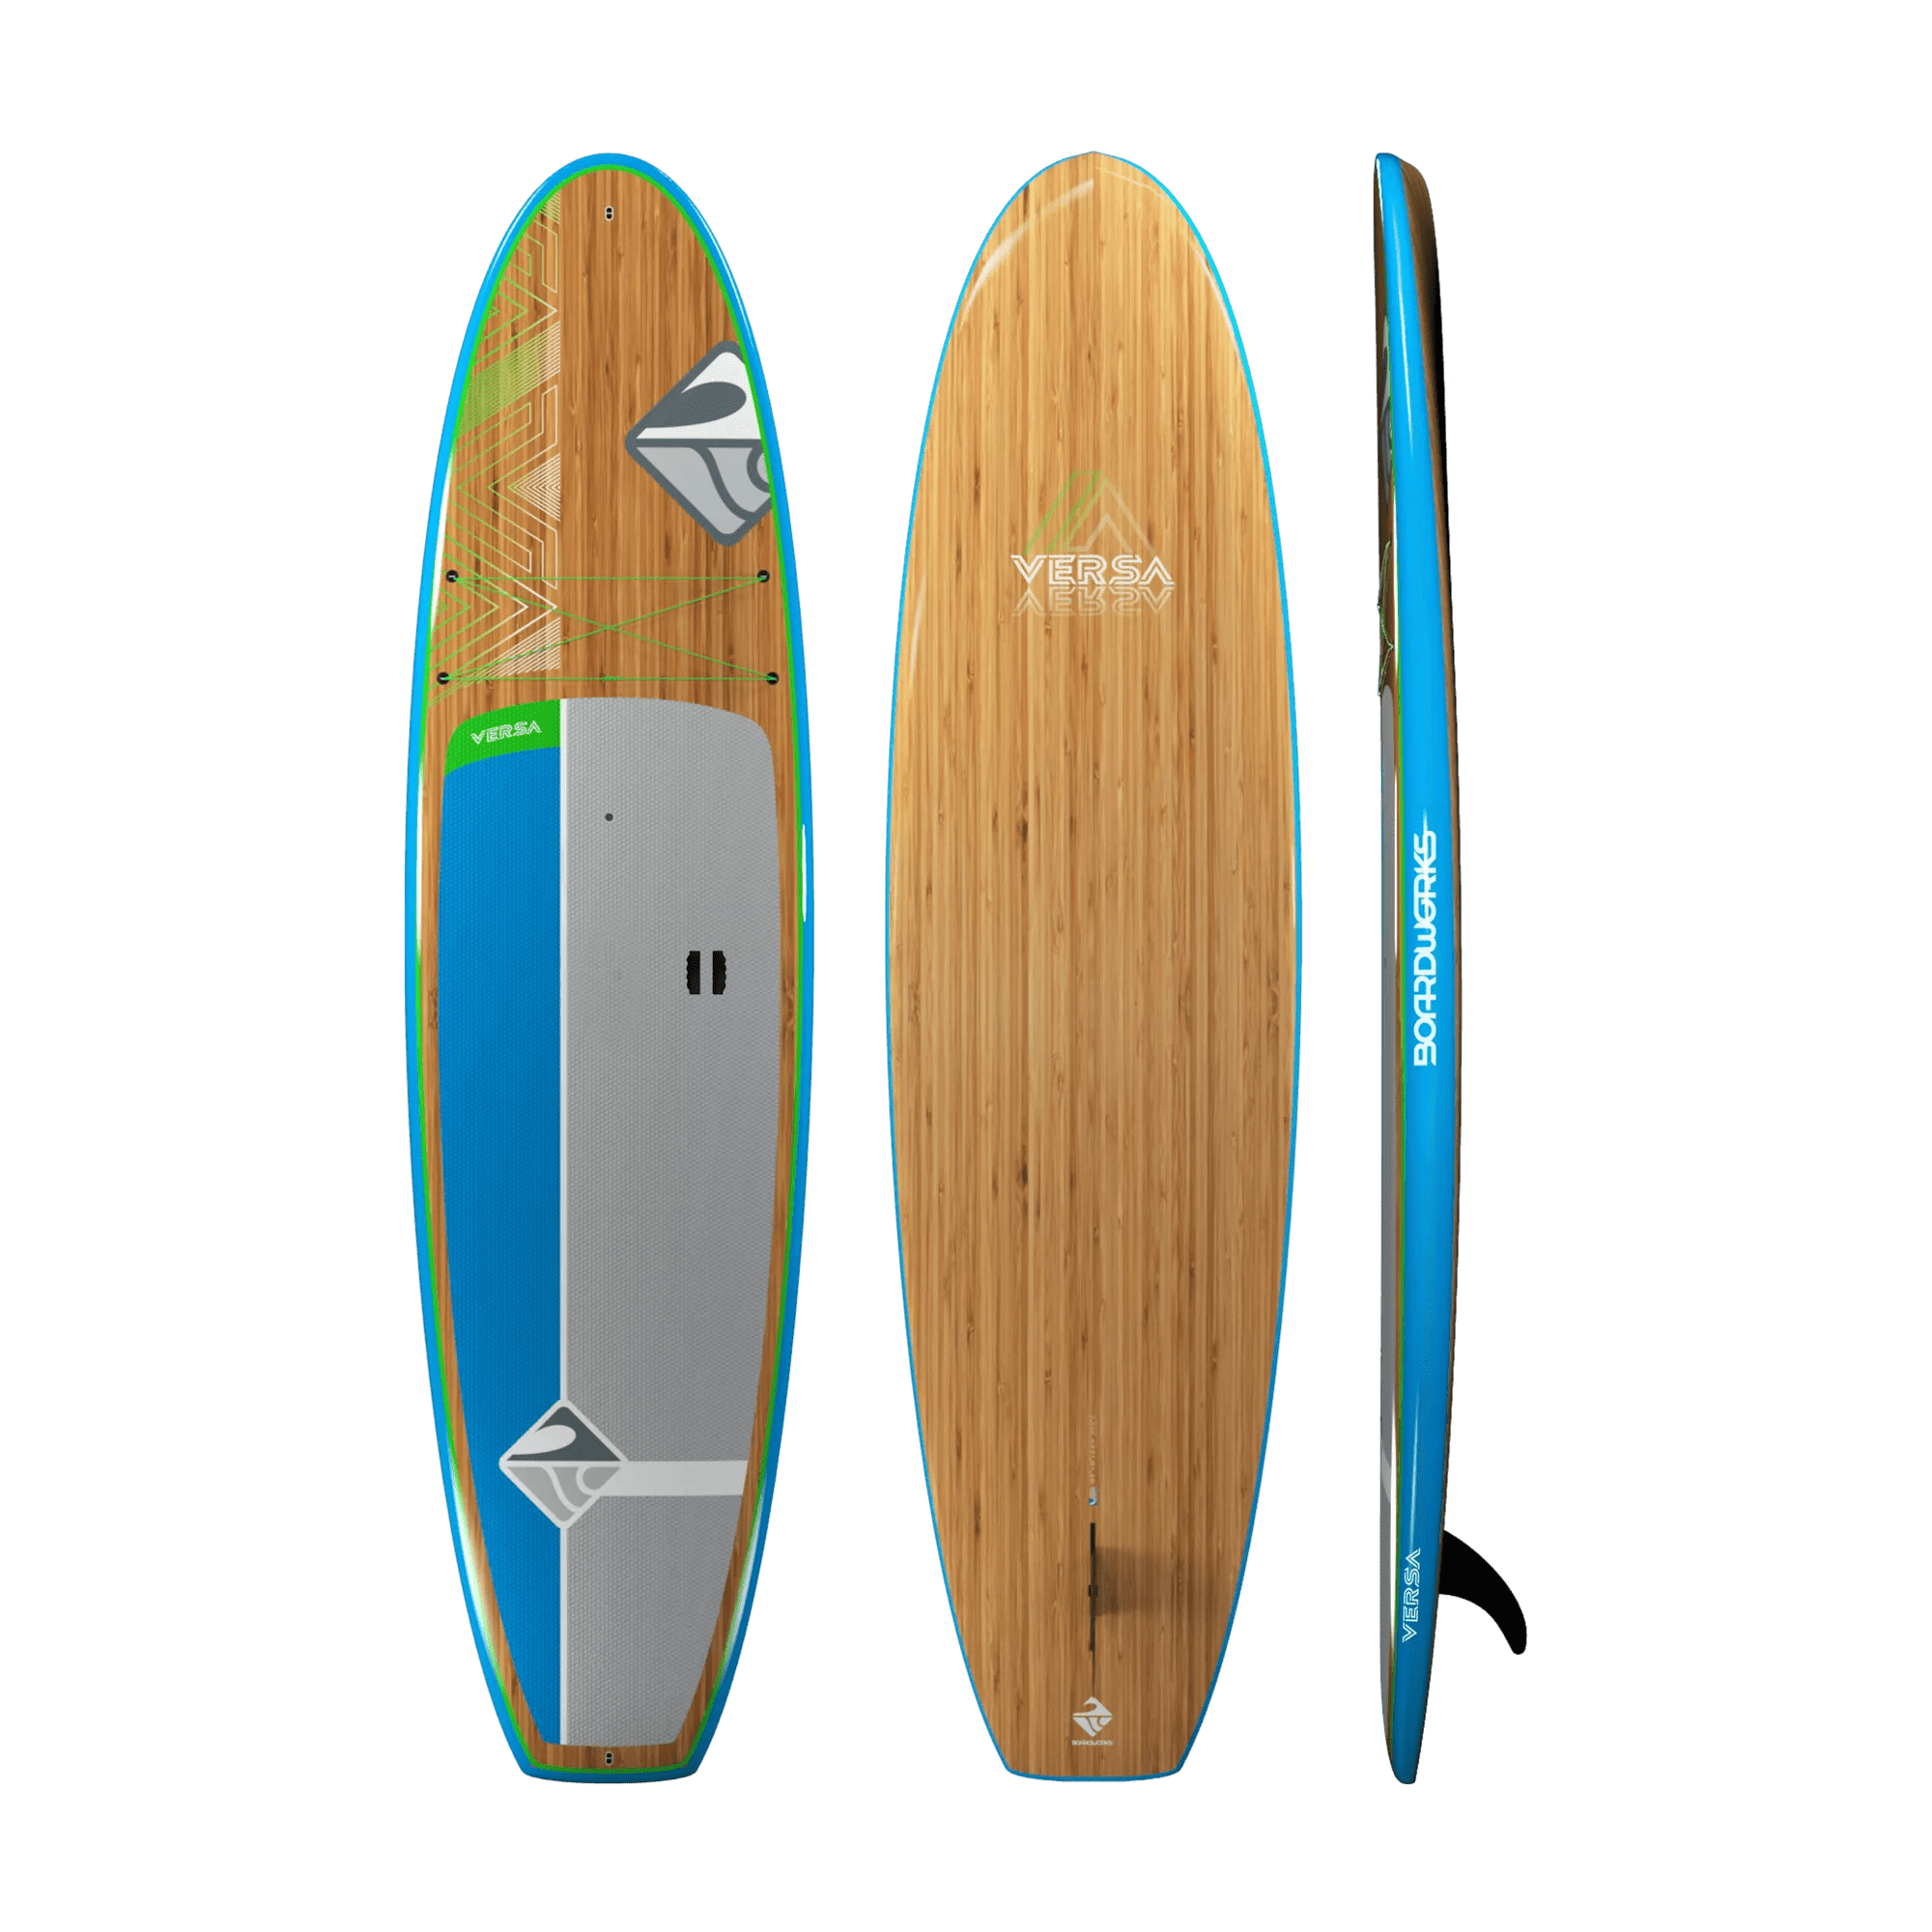 BOARDWORKS - Versa 10'6" All-Around Paddle Board - Blue - 4440529519 - TOP 